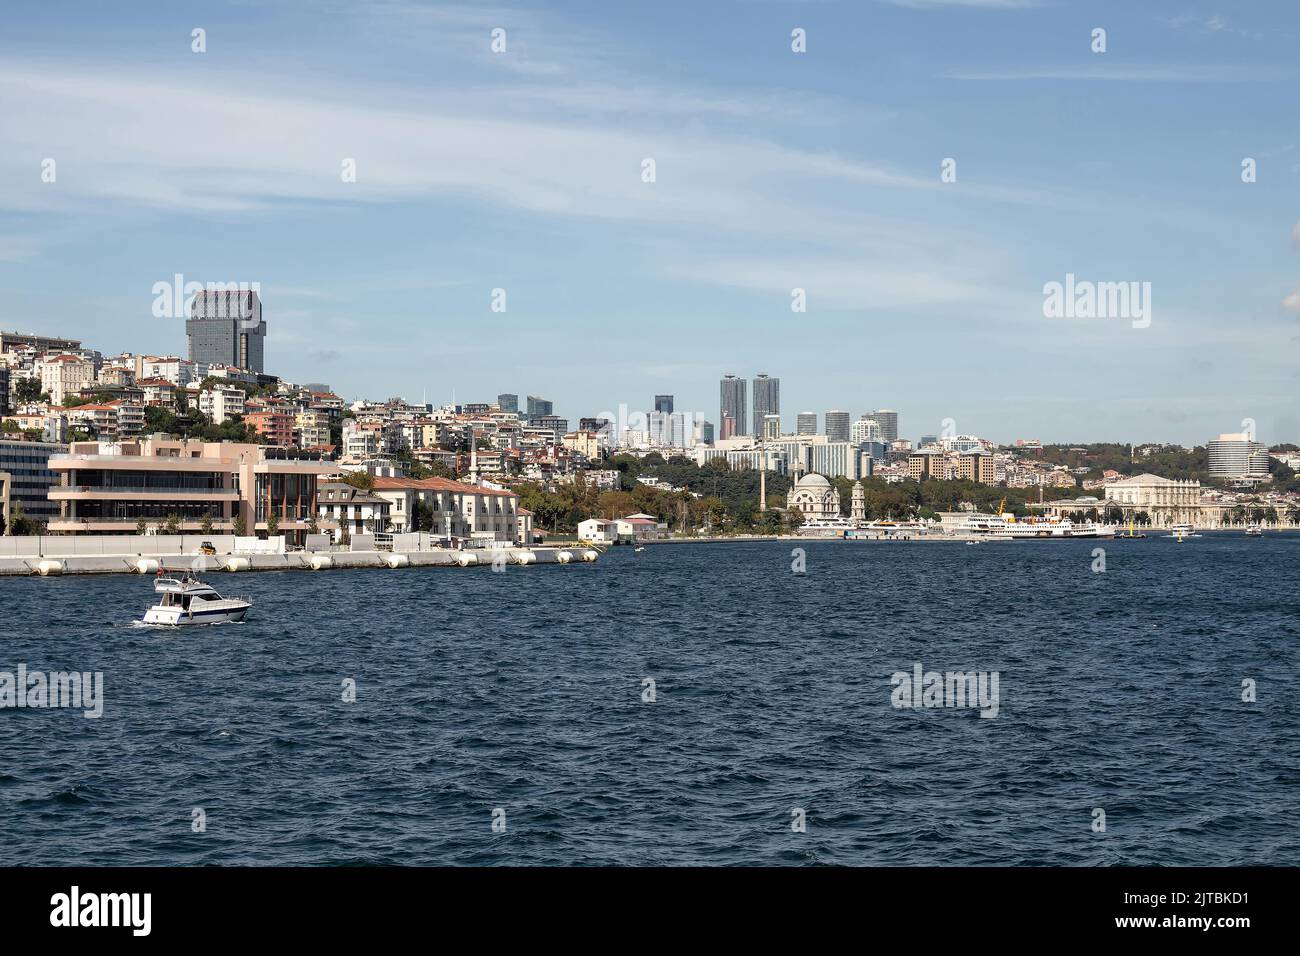 View of a yacht on Bosphorus and European side of Istanbul. It is a sunny summer day. Stock Photo